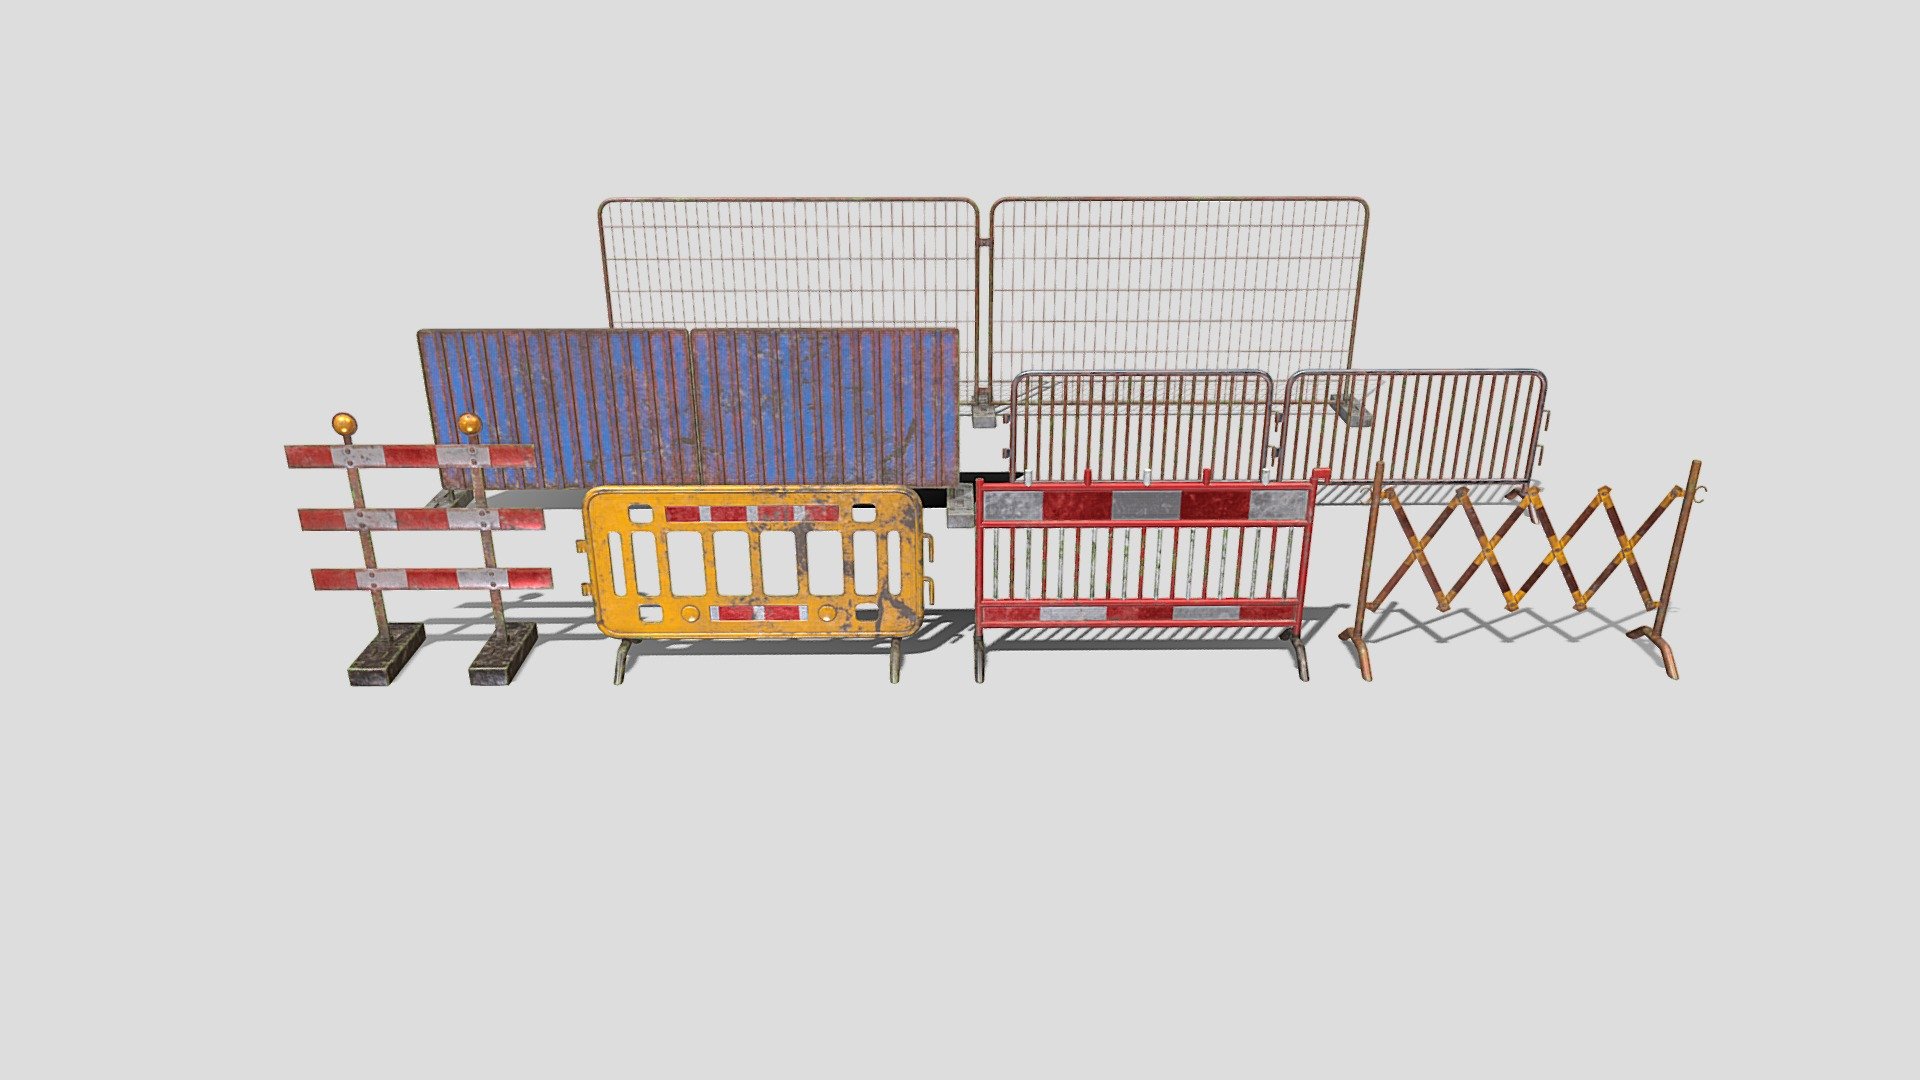 Tileable PBR construction site barrier guardrail 3d model pack rendered with Cycles in Blender, as per seen on attached images. It consists of 7 types of barriers, each split into its own object.
The models are made in a manner that allows it to be arrayed end to end, thus allowing to make the required length of the barrier as needed.

File formats:
-.blend, rendered with cycles, as seen in the images;
-.obj, with materials applied;
-.dae, with materials applied;
-.fbx, with materials applied;
-.stl;

Files come named appropriately and split by file format.

3D Software:
The 3D model was originally created in Blender 3.1 and rendered with Cycles.

Materials and textures:
The models have materials applied in all formats, and are ready to import and render.
Materials are image based using PBR, the models come with five 1k png image textures per each barrier, thus 35 images in total.

For any problems please feel free to contact me.

Don't forget to rate and enjoy! - Construction site barrier pack V1 weathered - Buy Royalty Free 3D model by dragosburian 3d model